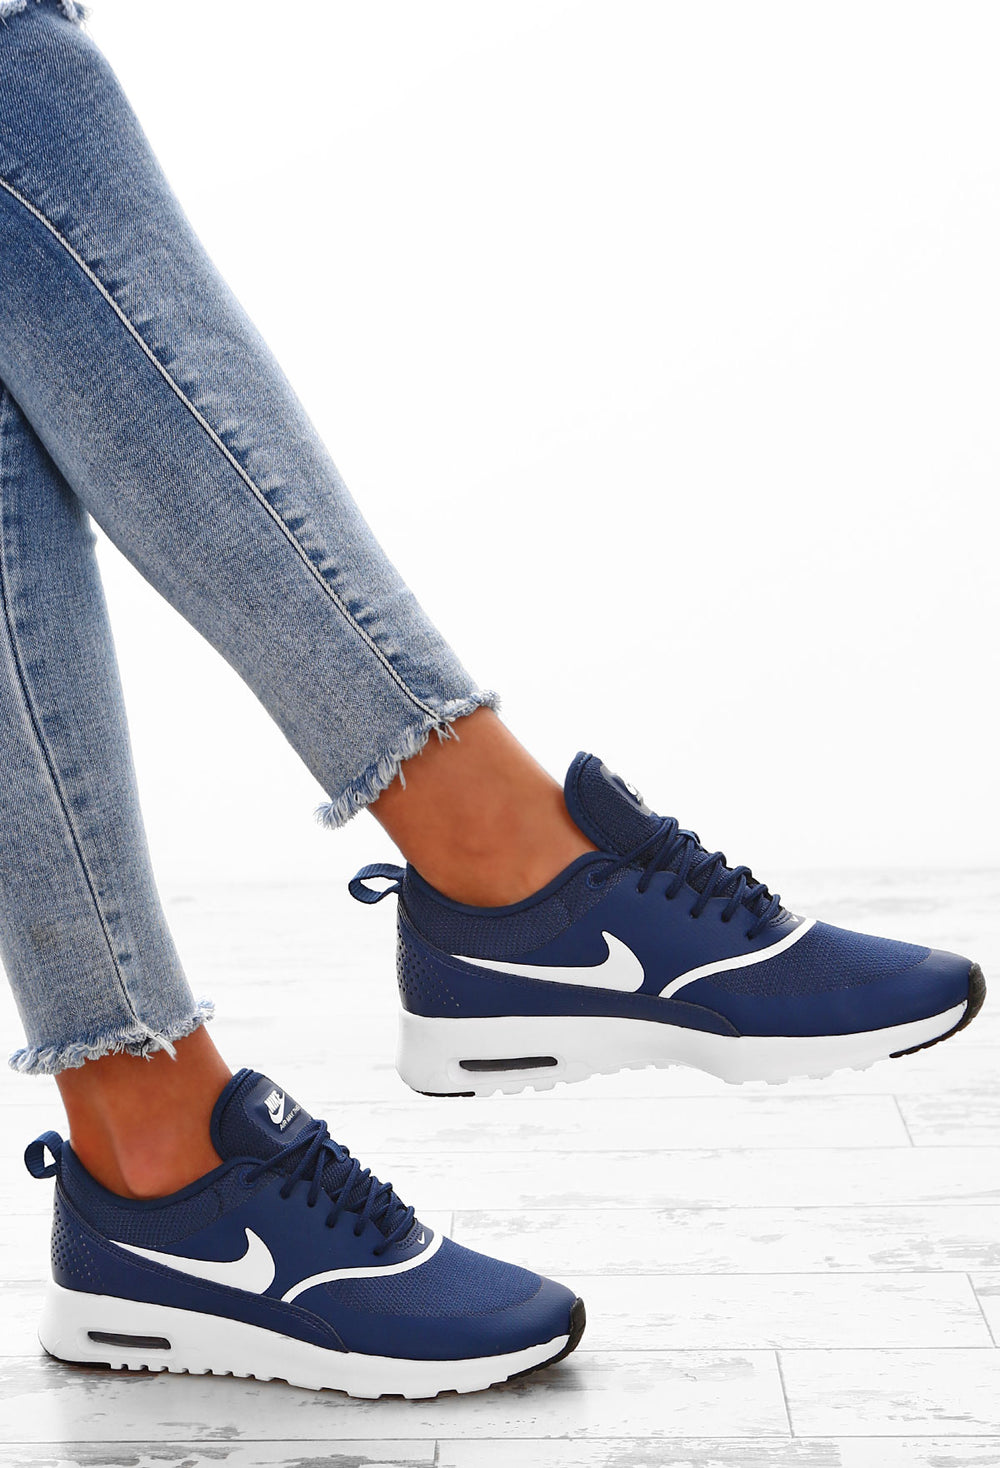 Nike Air Max Thea Navy Trainers – Pink 